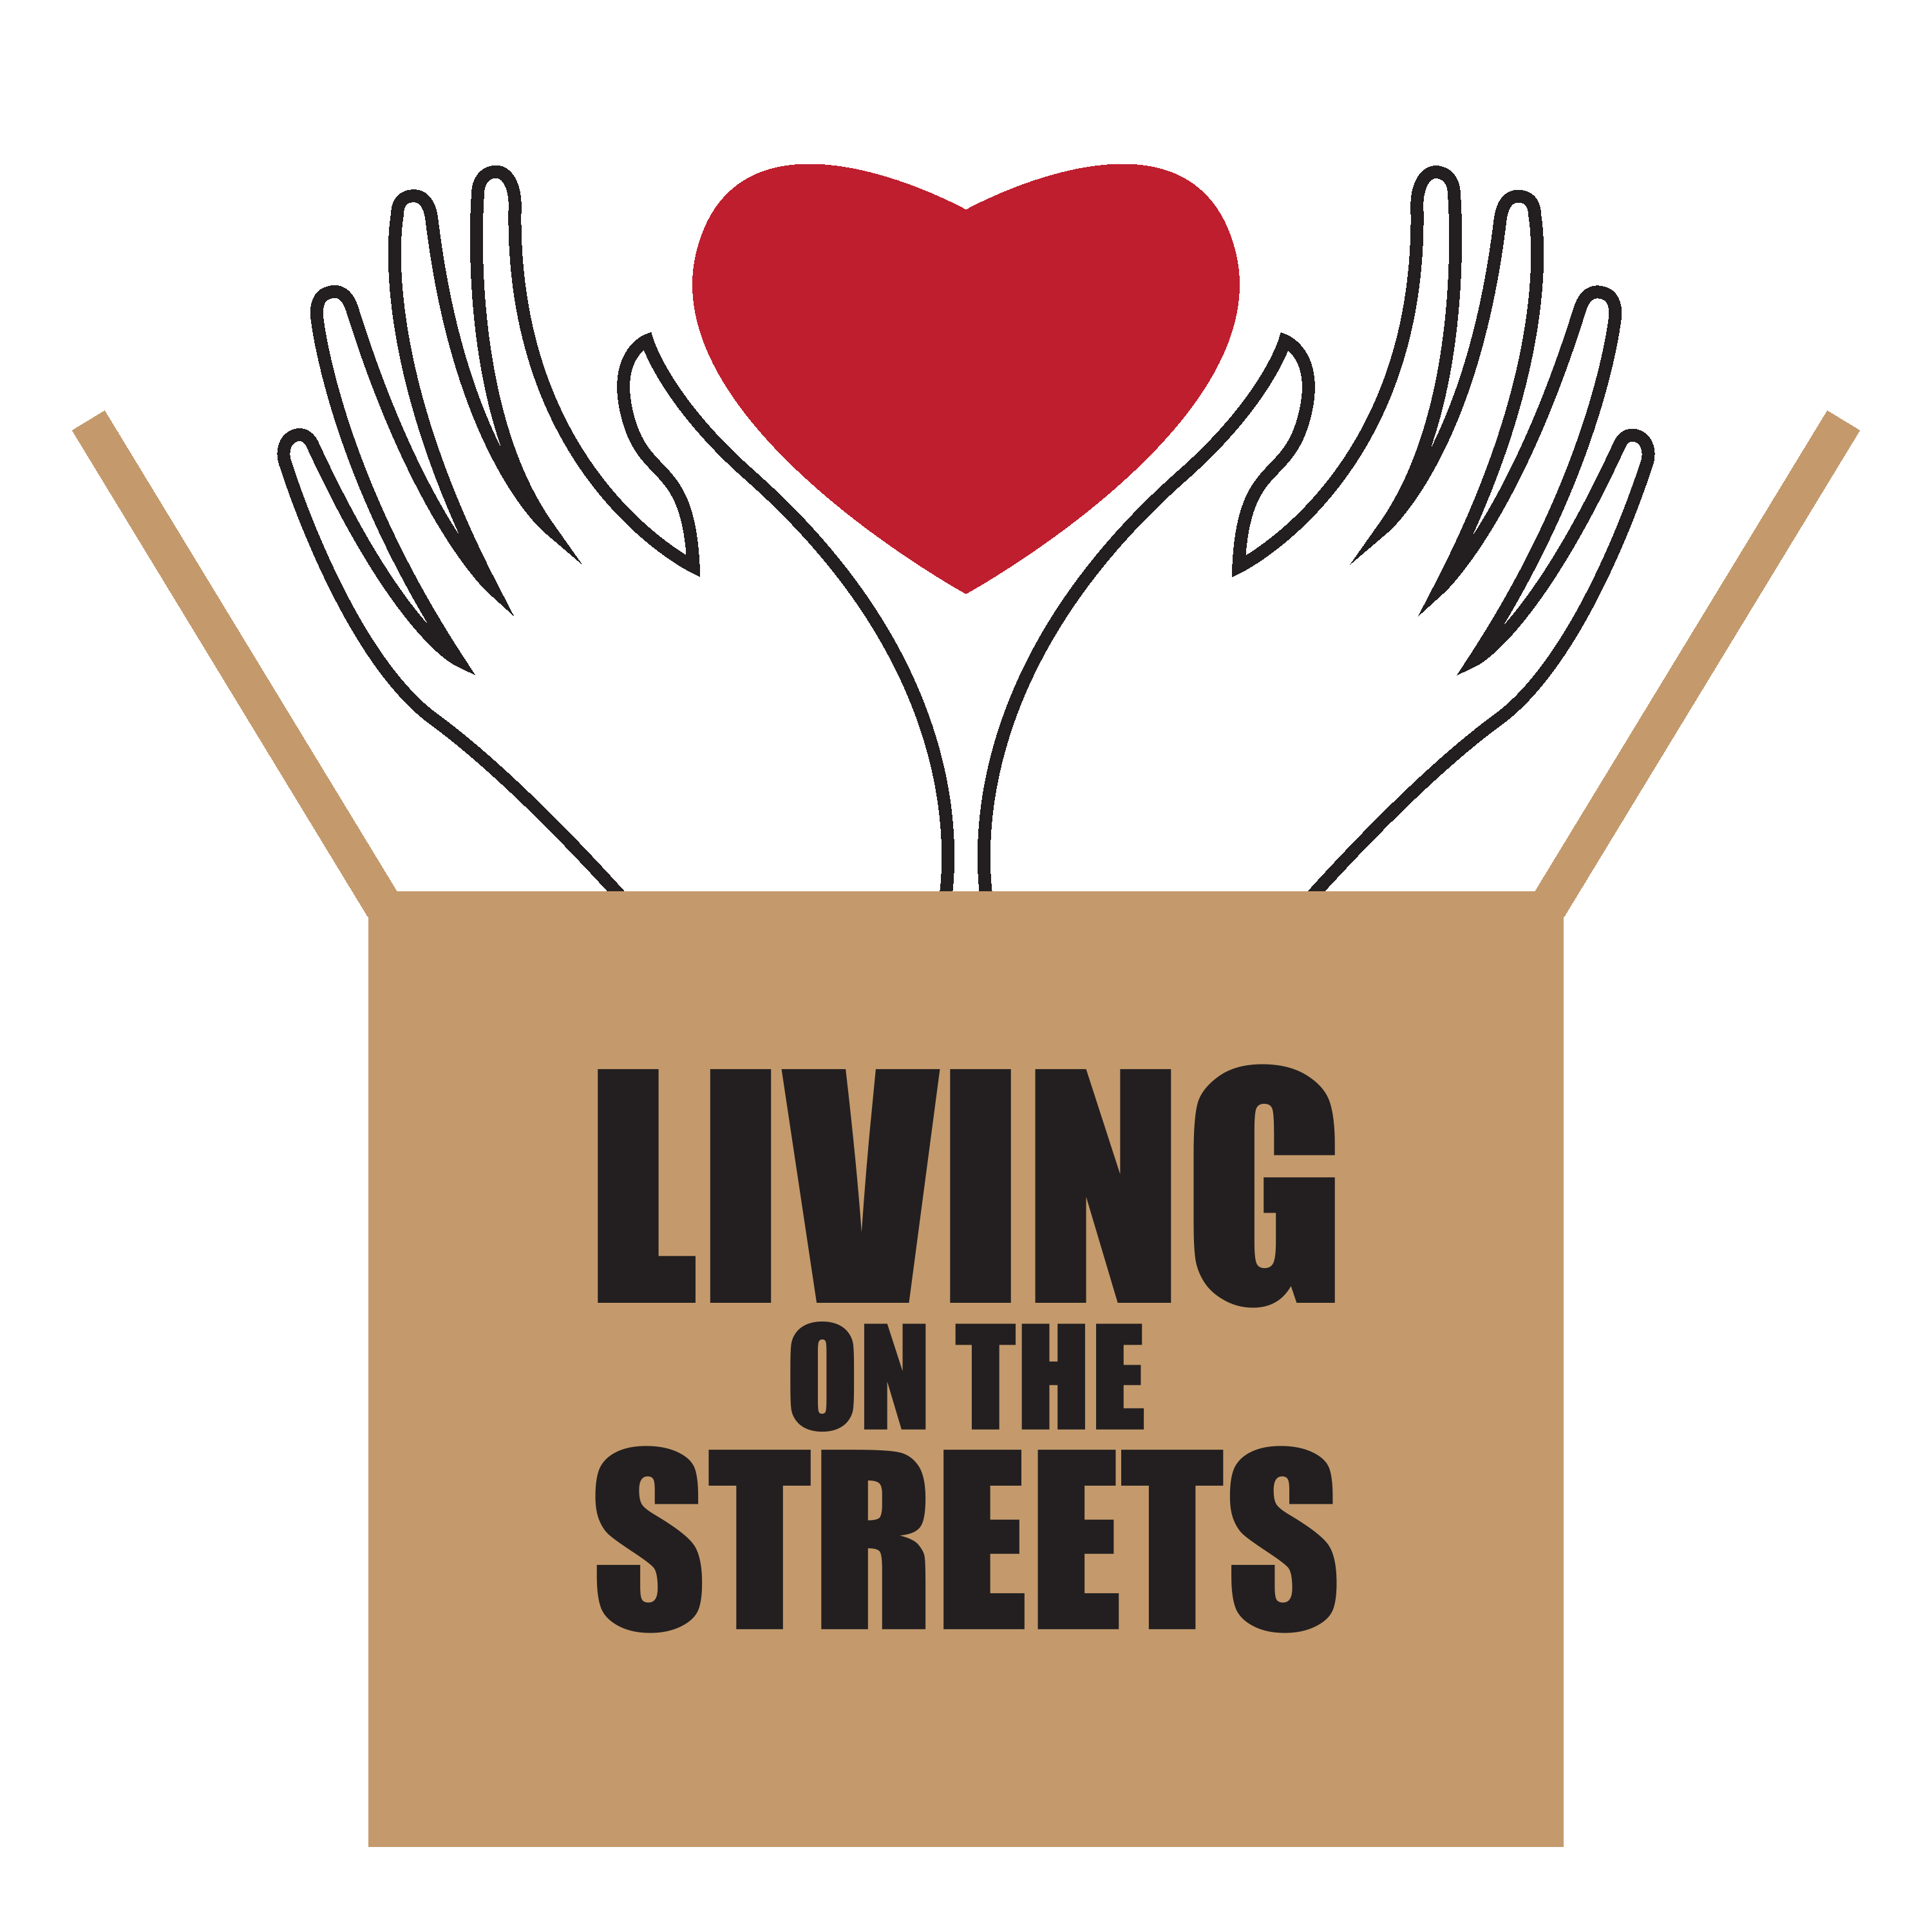 Homeless Logo - Living on the Streets - Helping Hands Pantry